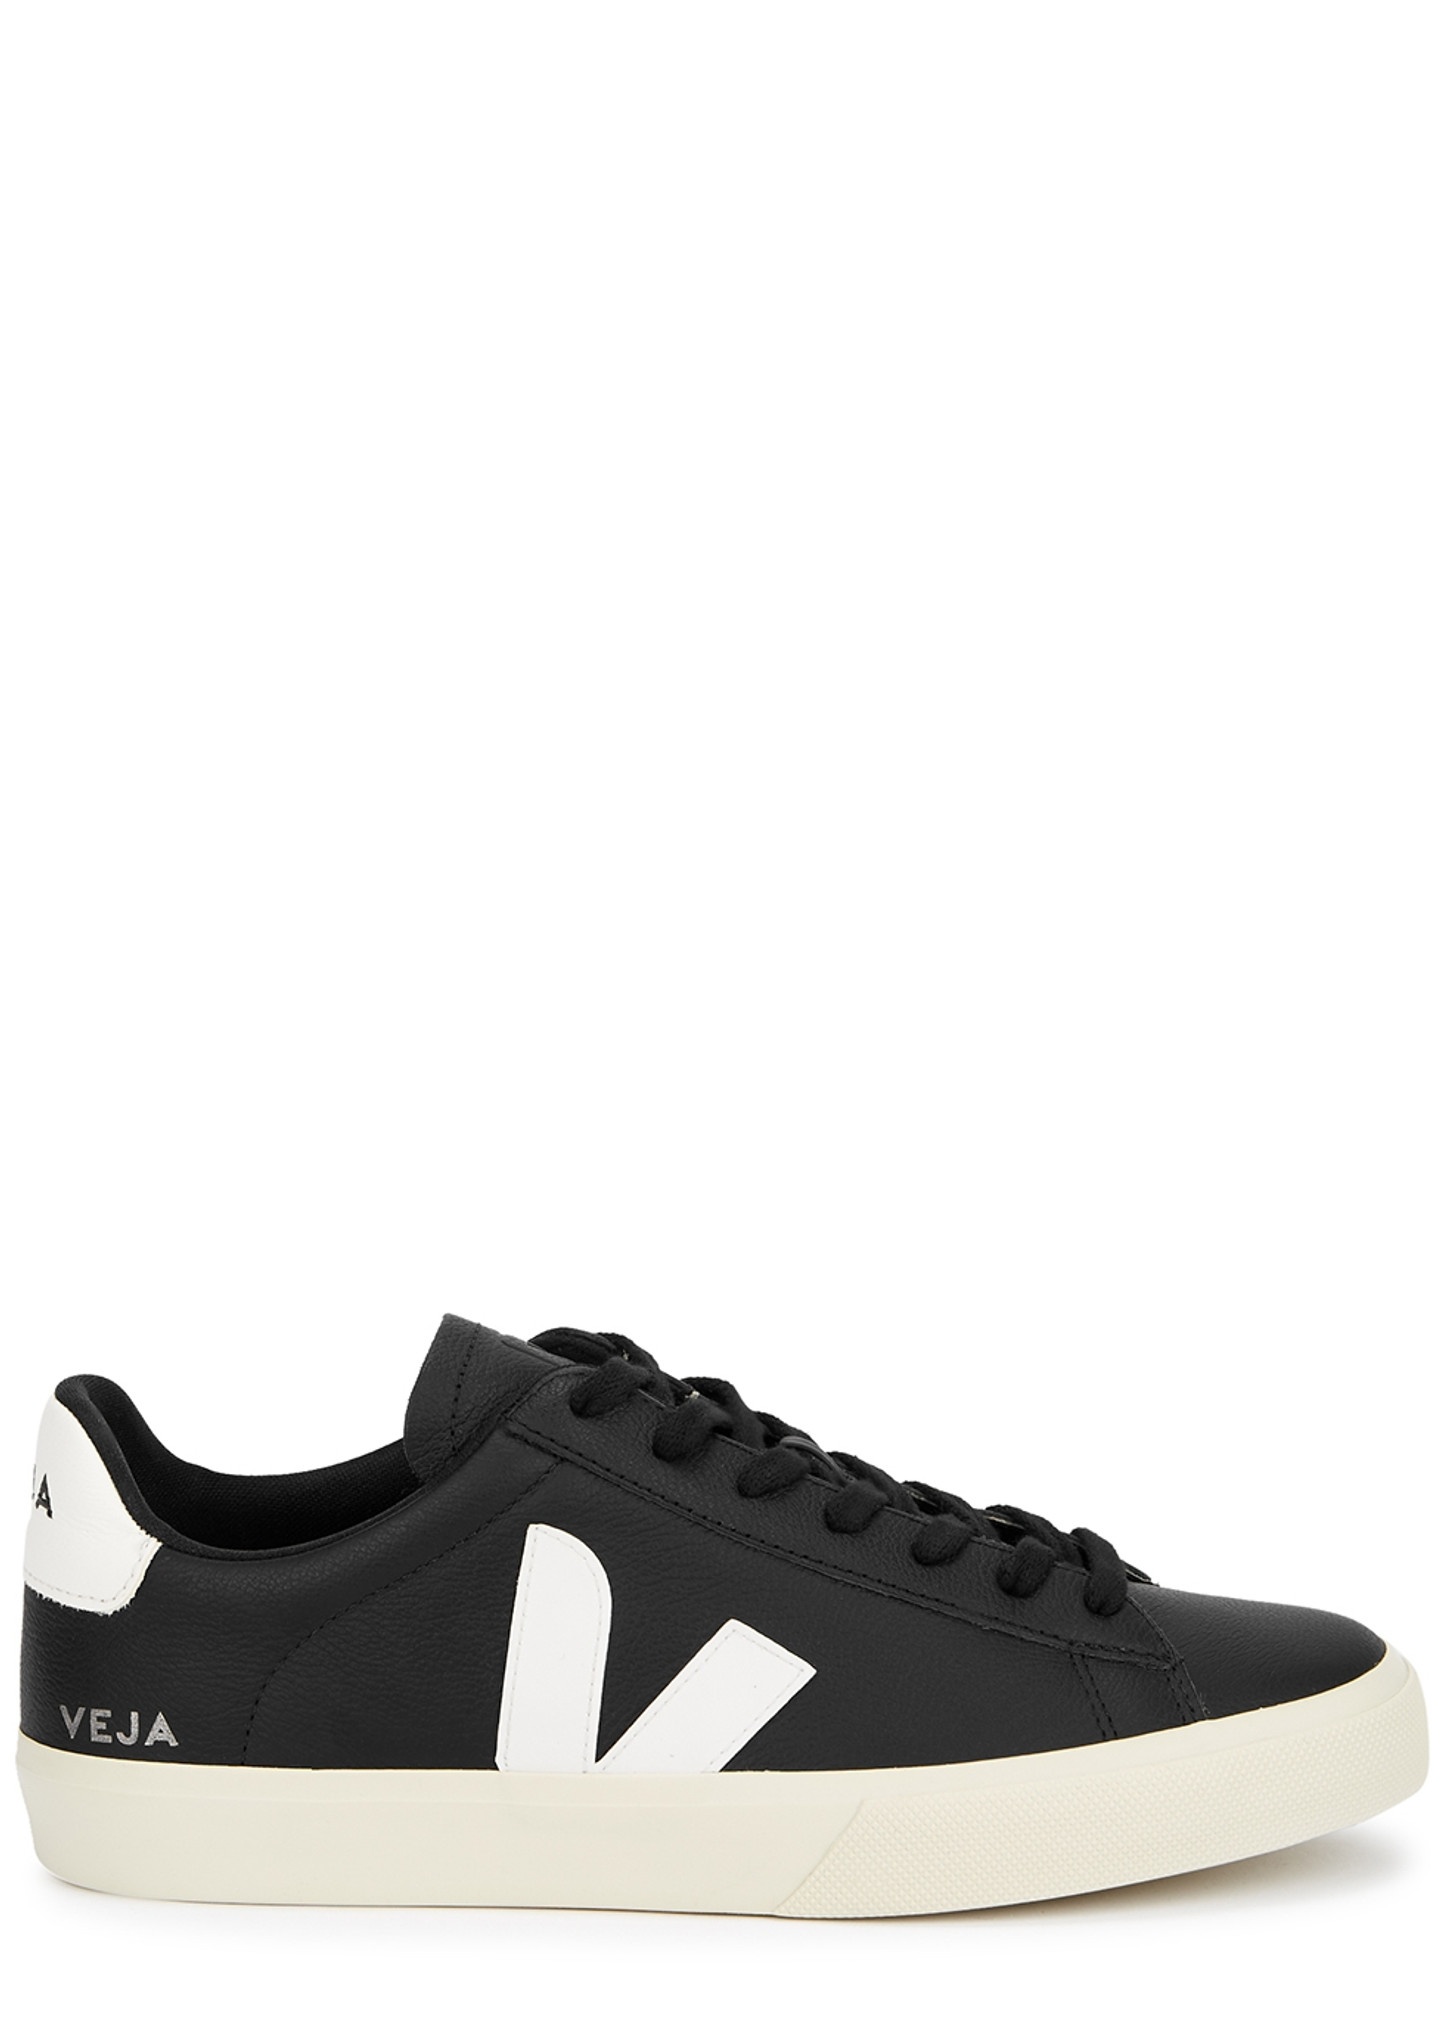 Campo black leather sneaker - 1